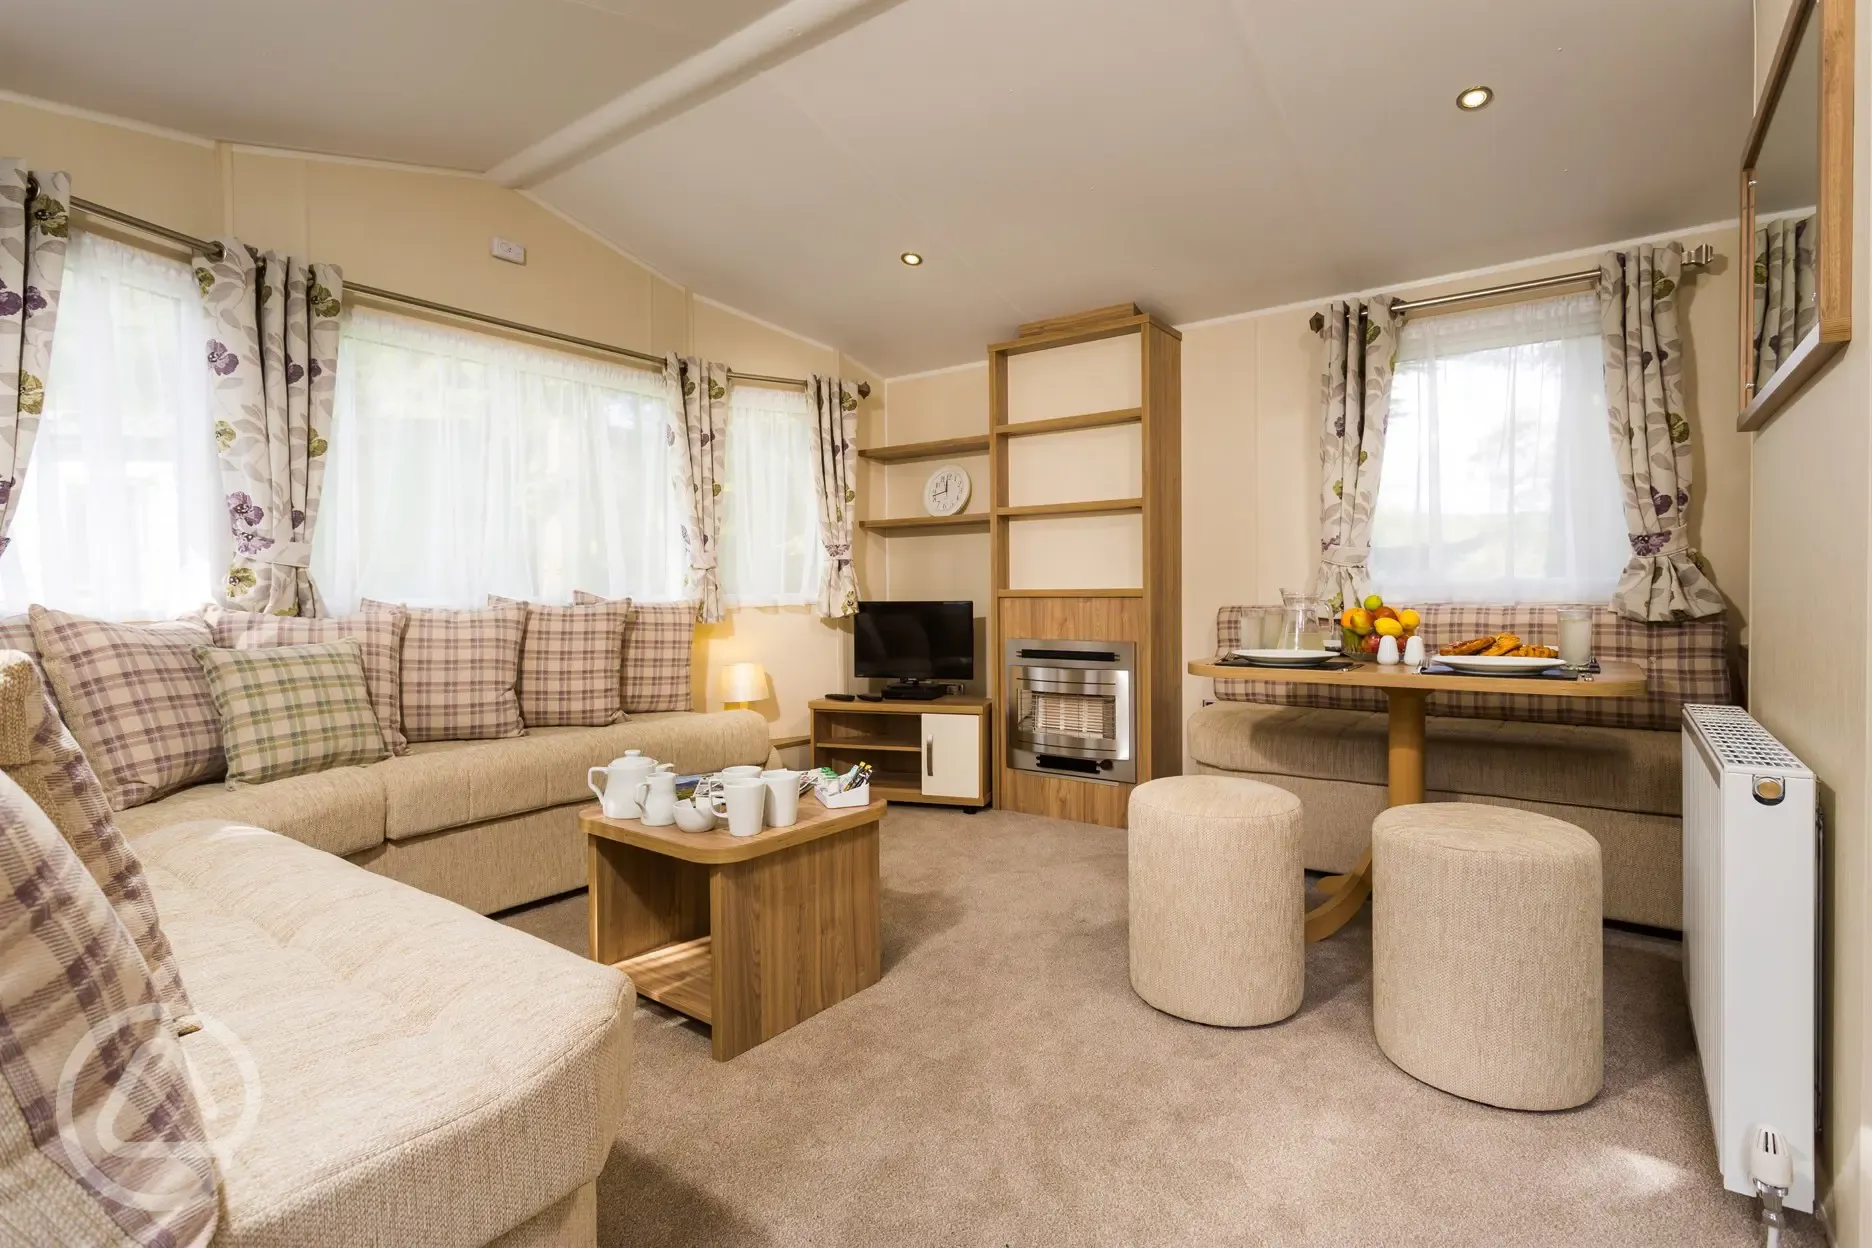 Living Room of the Derwent, our fully accessible caravan.